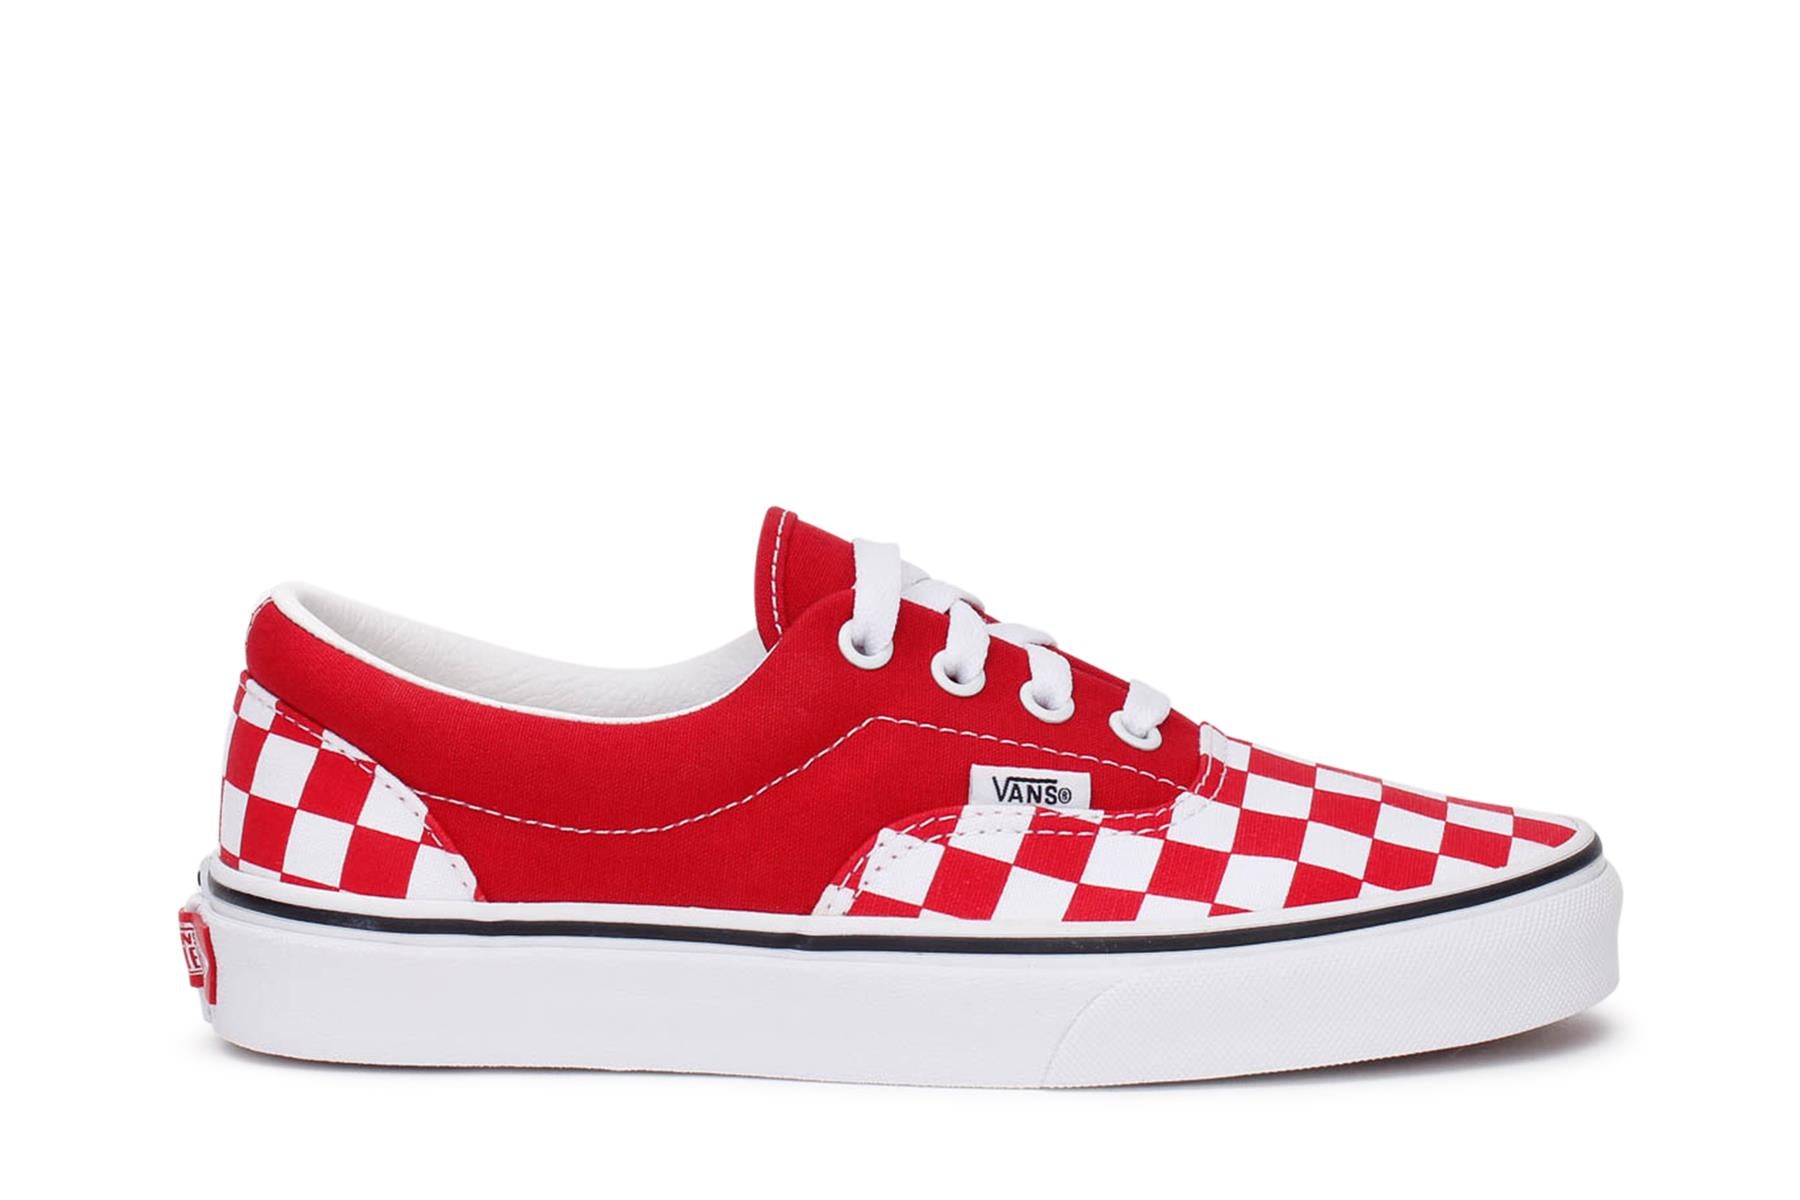 vans-mens-sneakers-era-checkerboard-racing-red-true-white-vn0a4bv4s4e-main